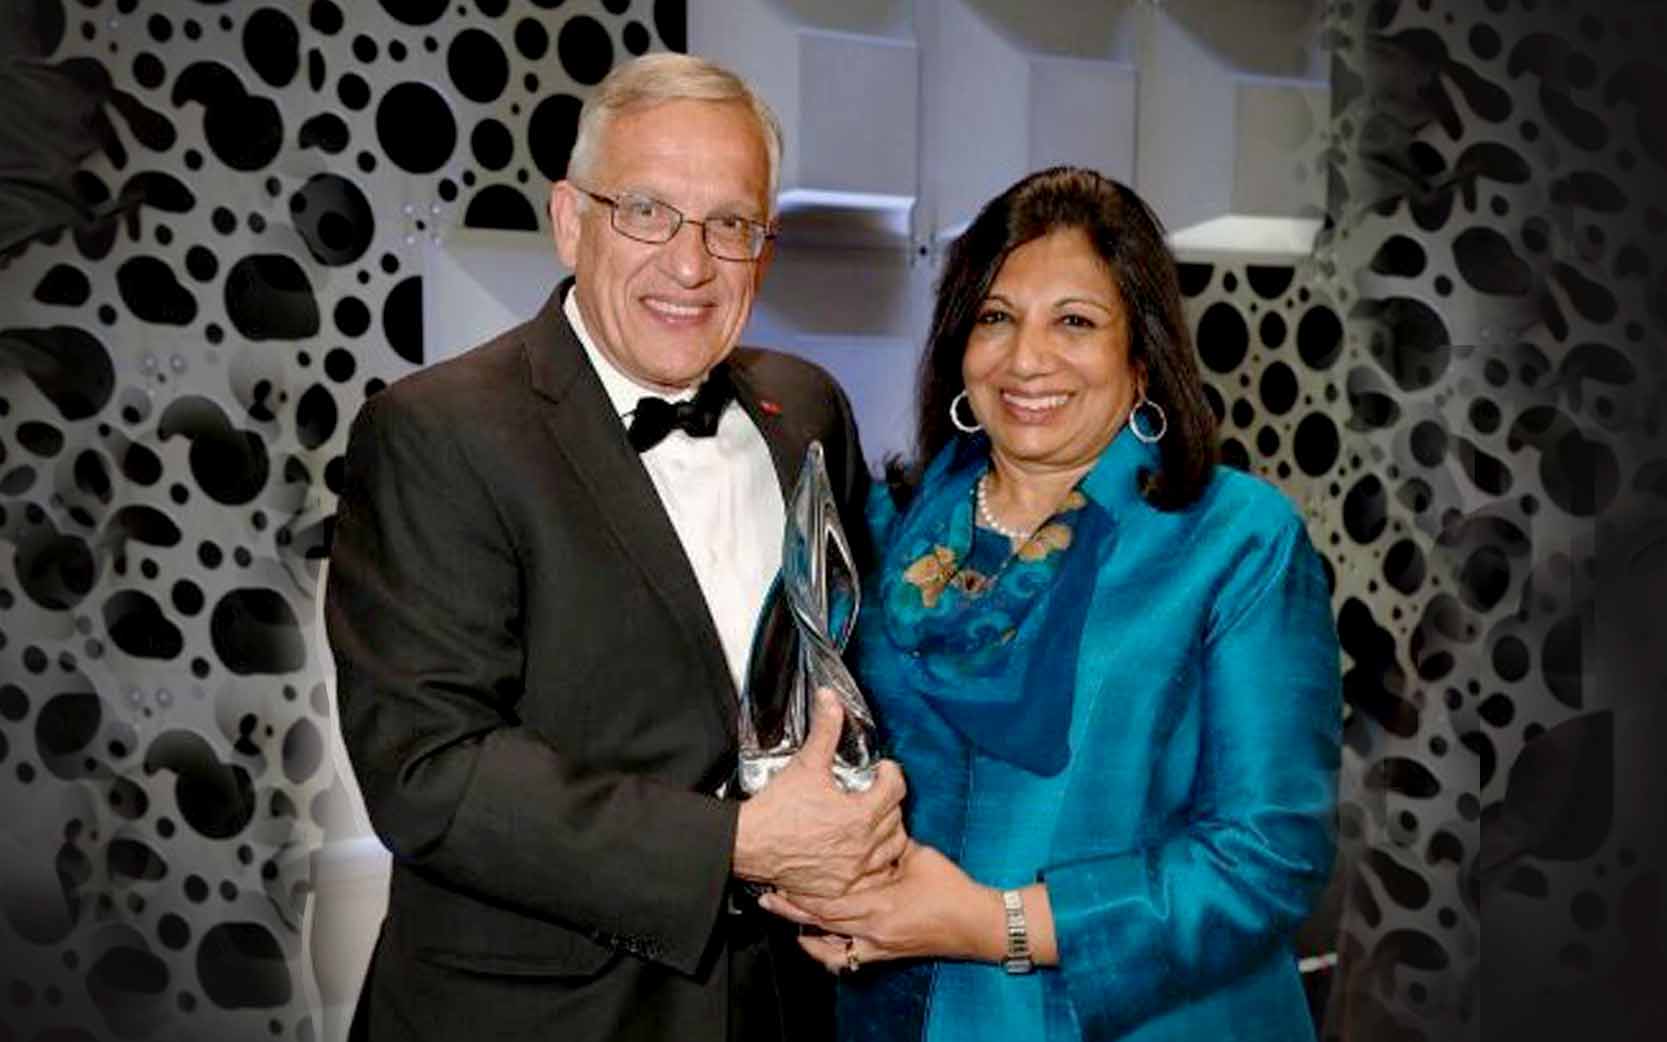 Conferred the Global Leadership in Engineering Award for consistent and outstanding contribution to the field of biotechnology by the USC Viterbi School of Engineering in 2016